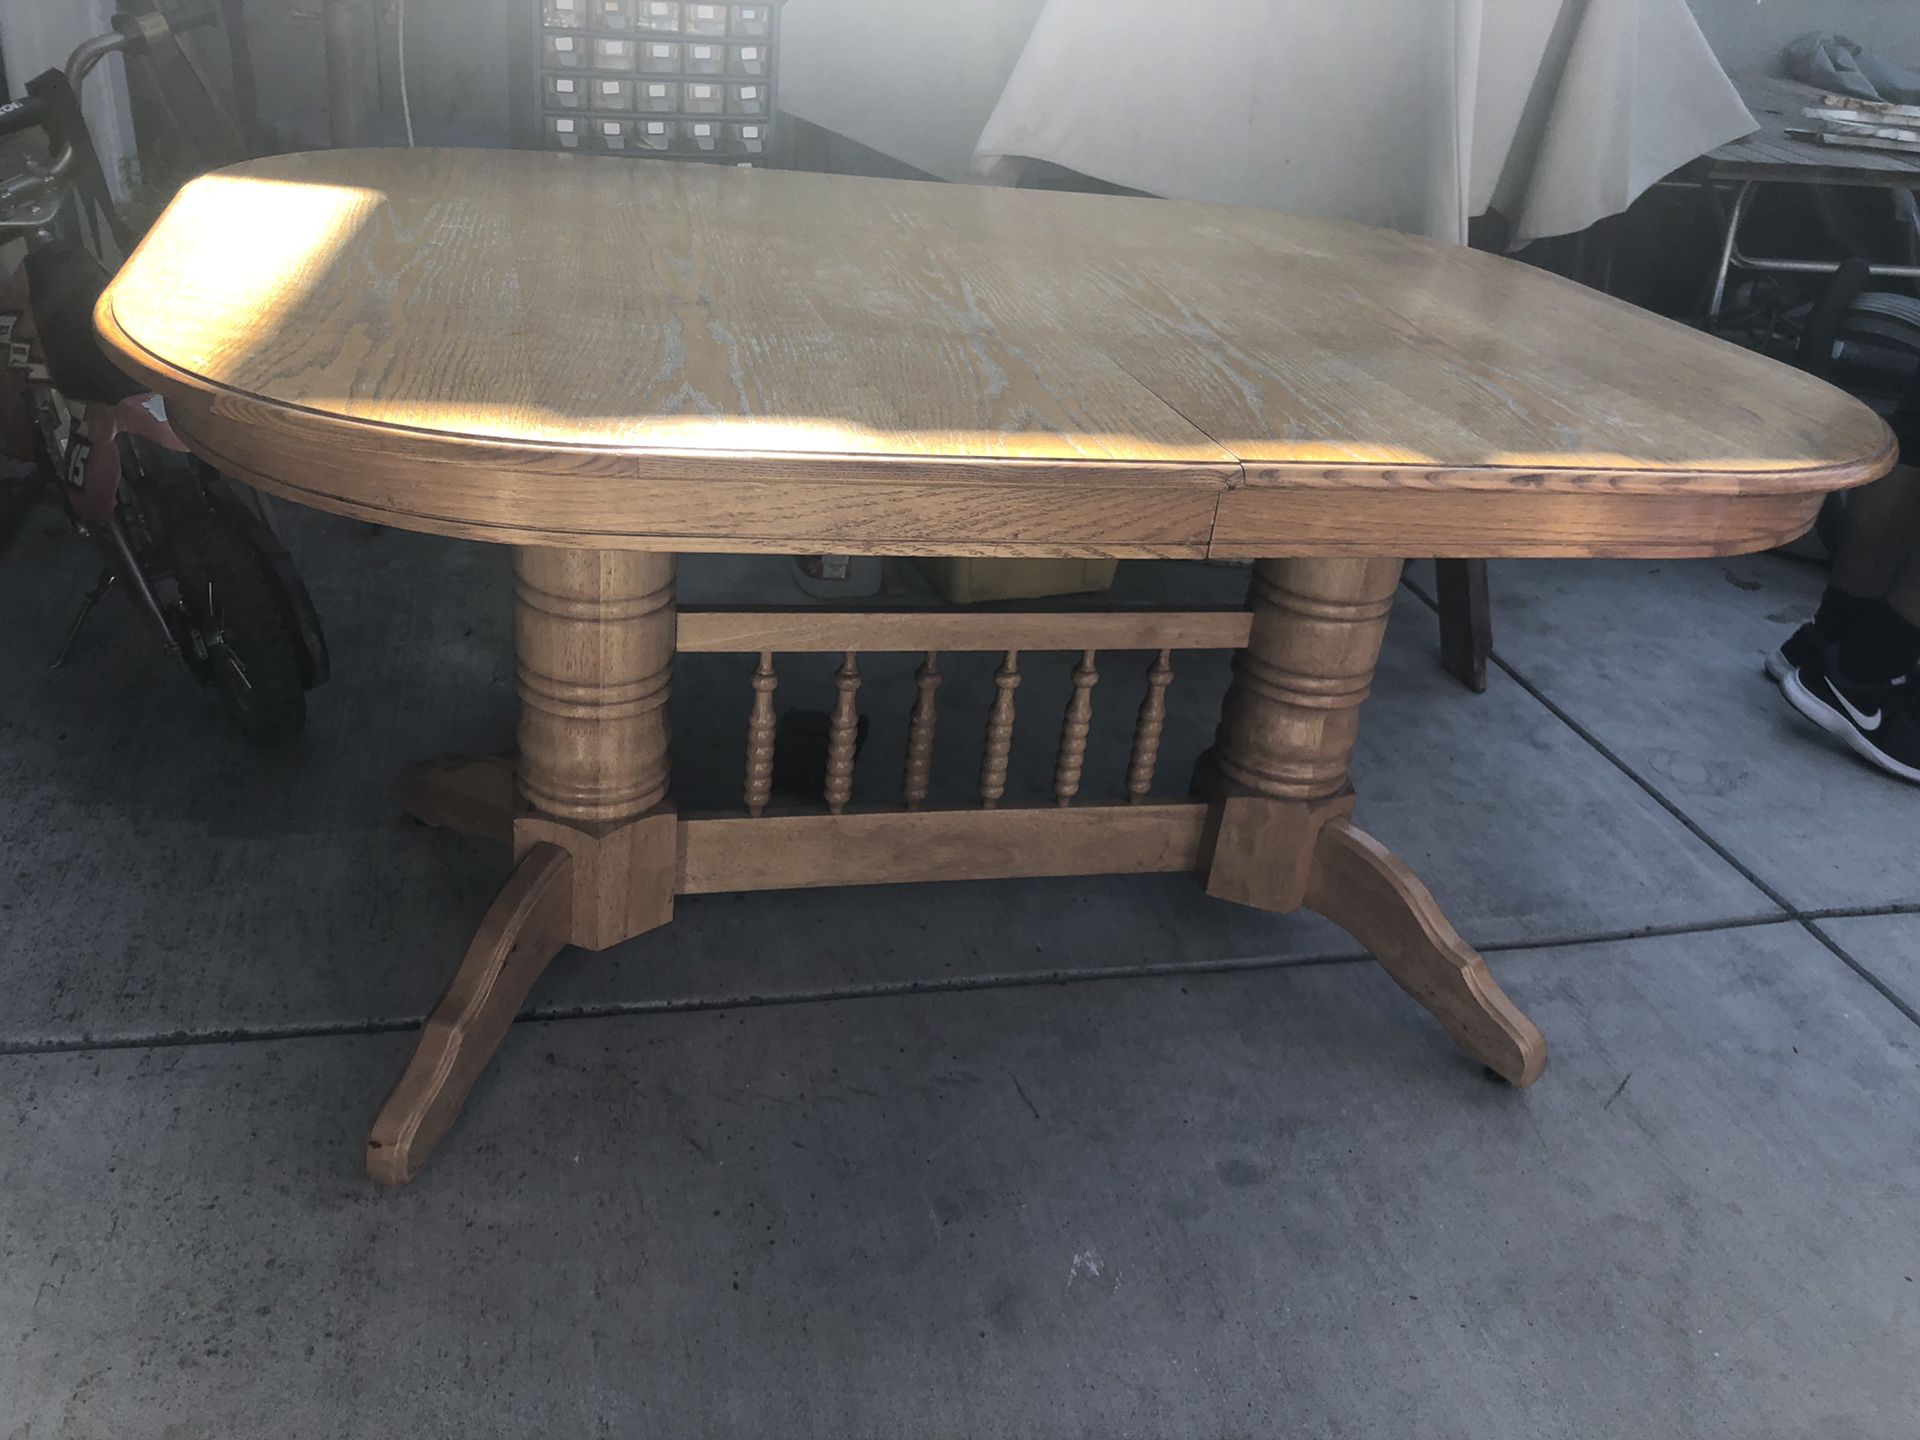 Kitchen table with no chairs